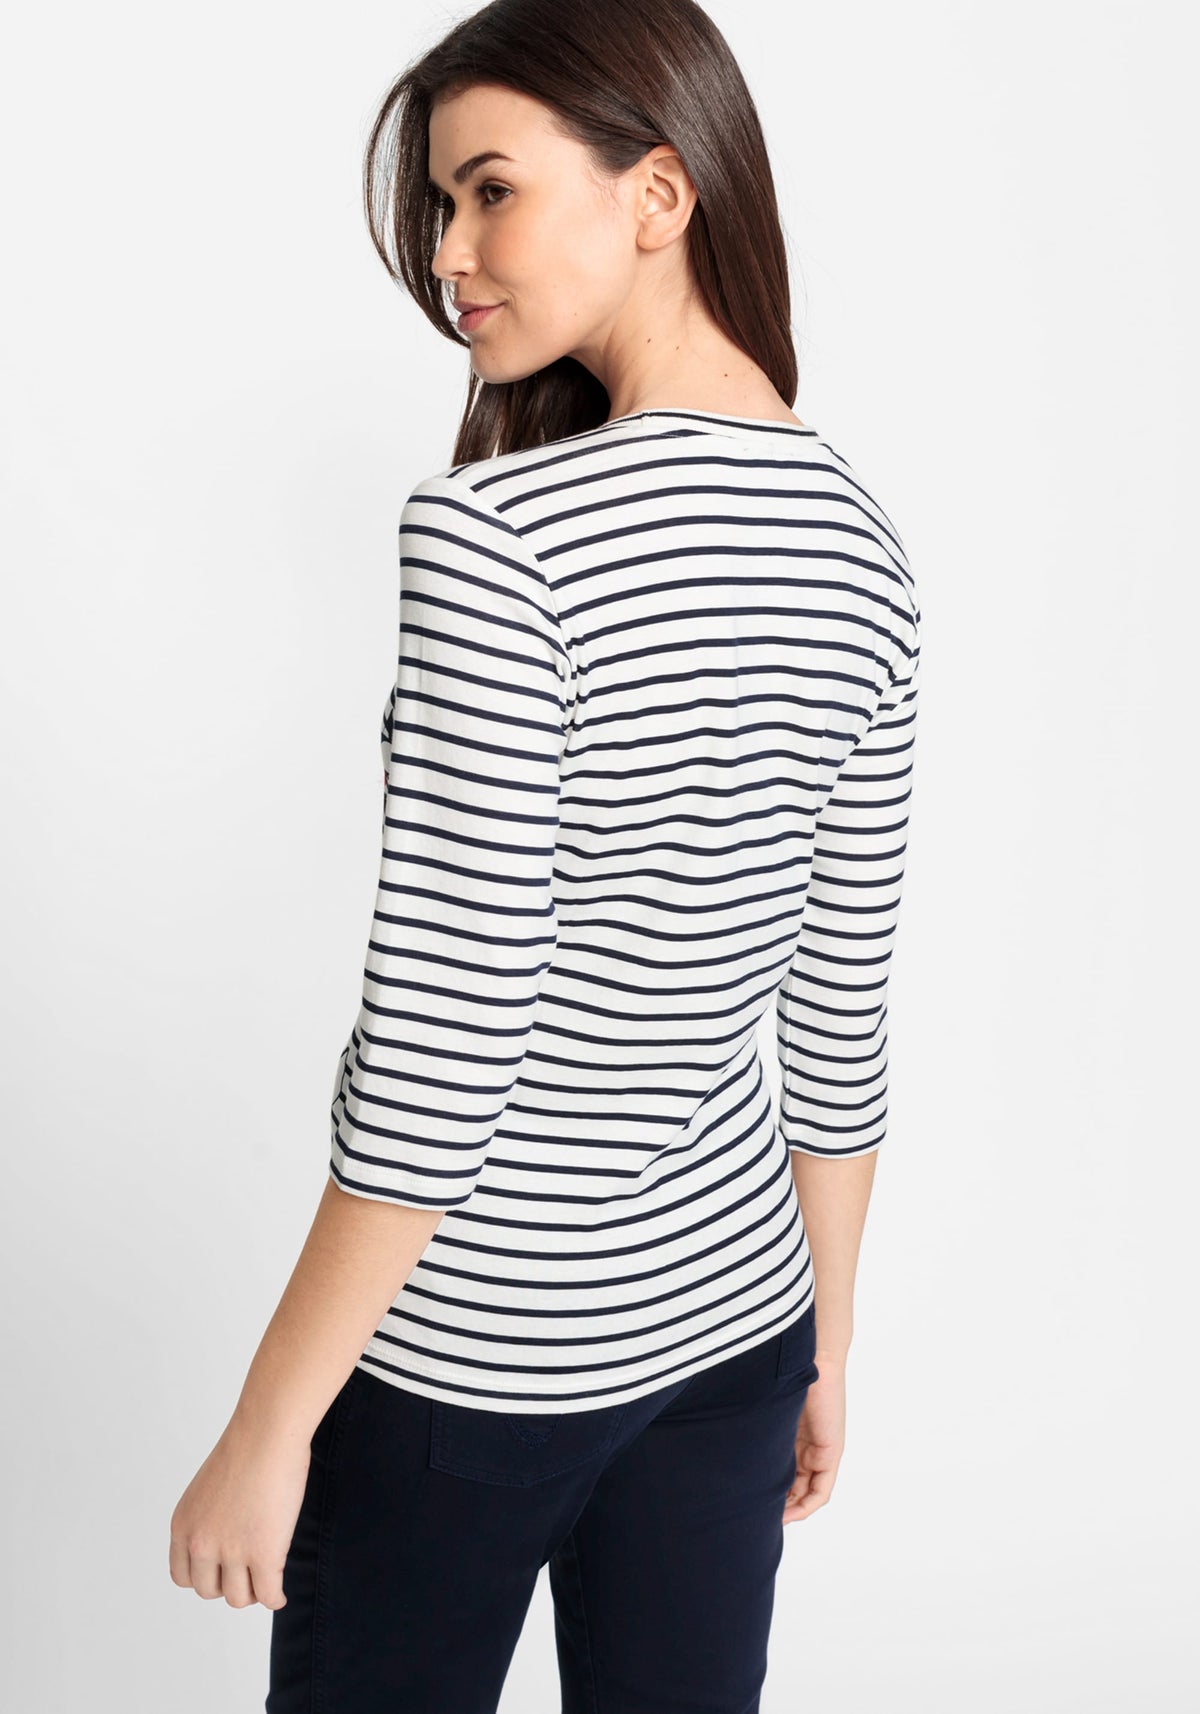 100% Cotton 3/4 Sleeve Stripe and Placement Print T-Shirt